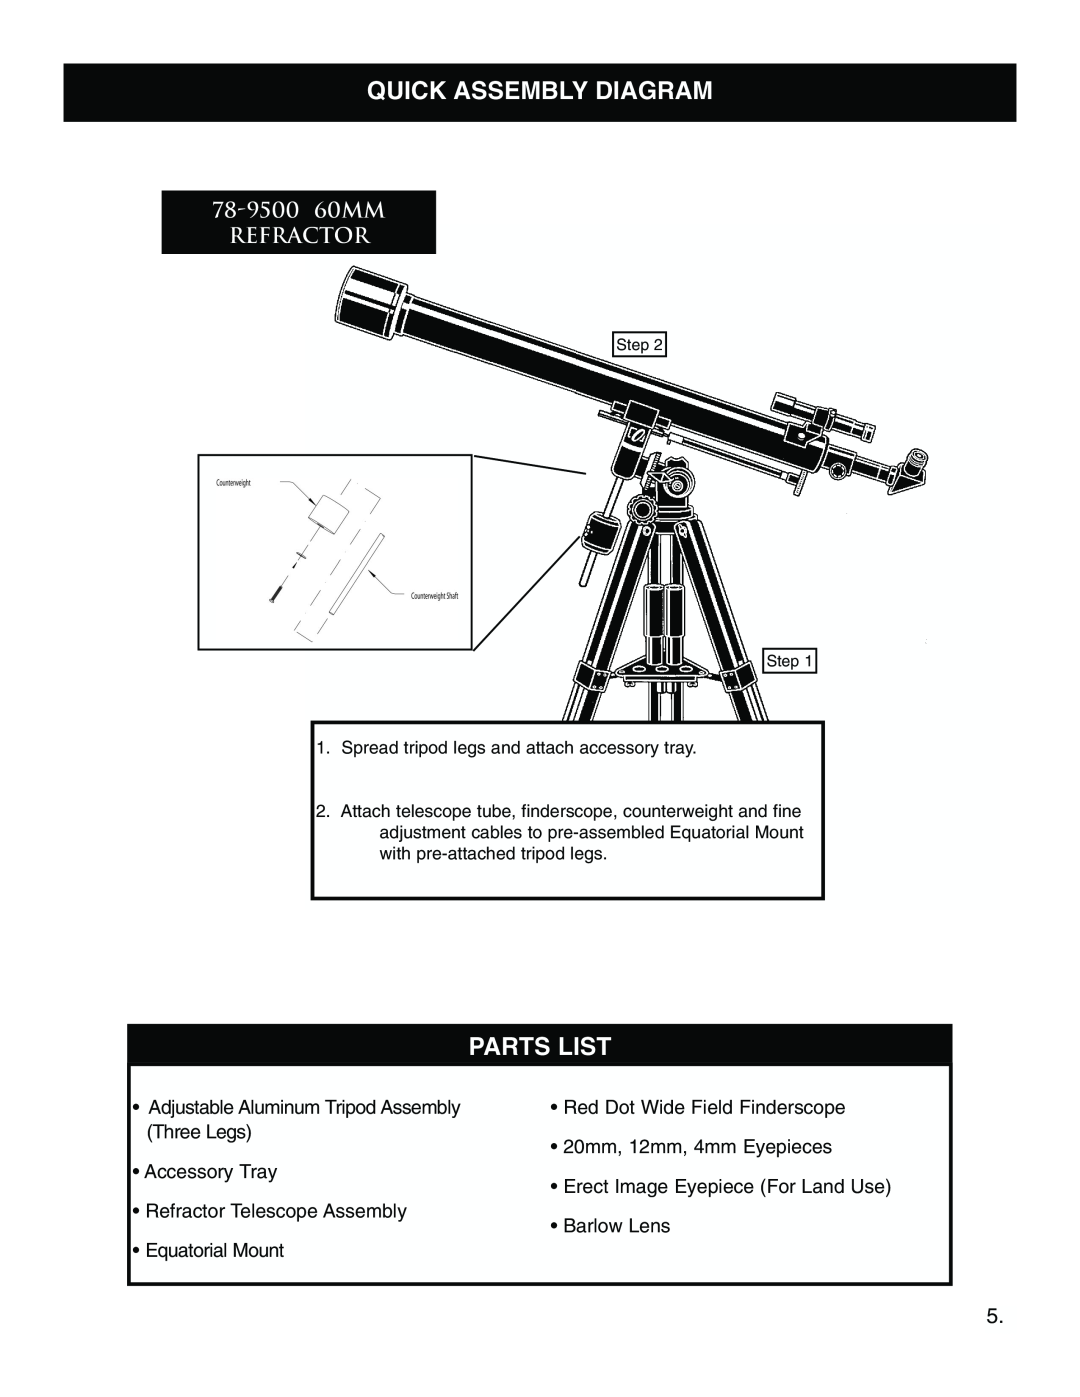 Bushnell Quick Assembly Diagram, Parts List, 78-950060MM REFRACTOR, Adjustable Aluminum Tripod Assembly, Step Step 